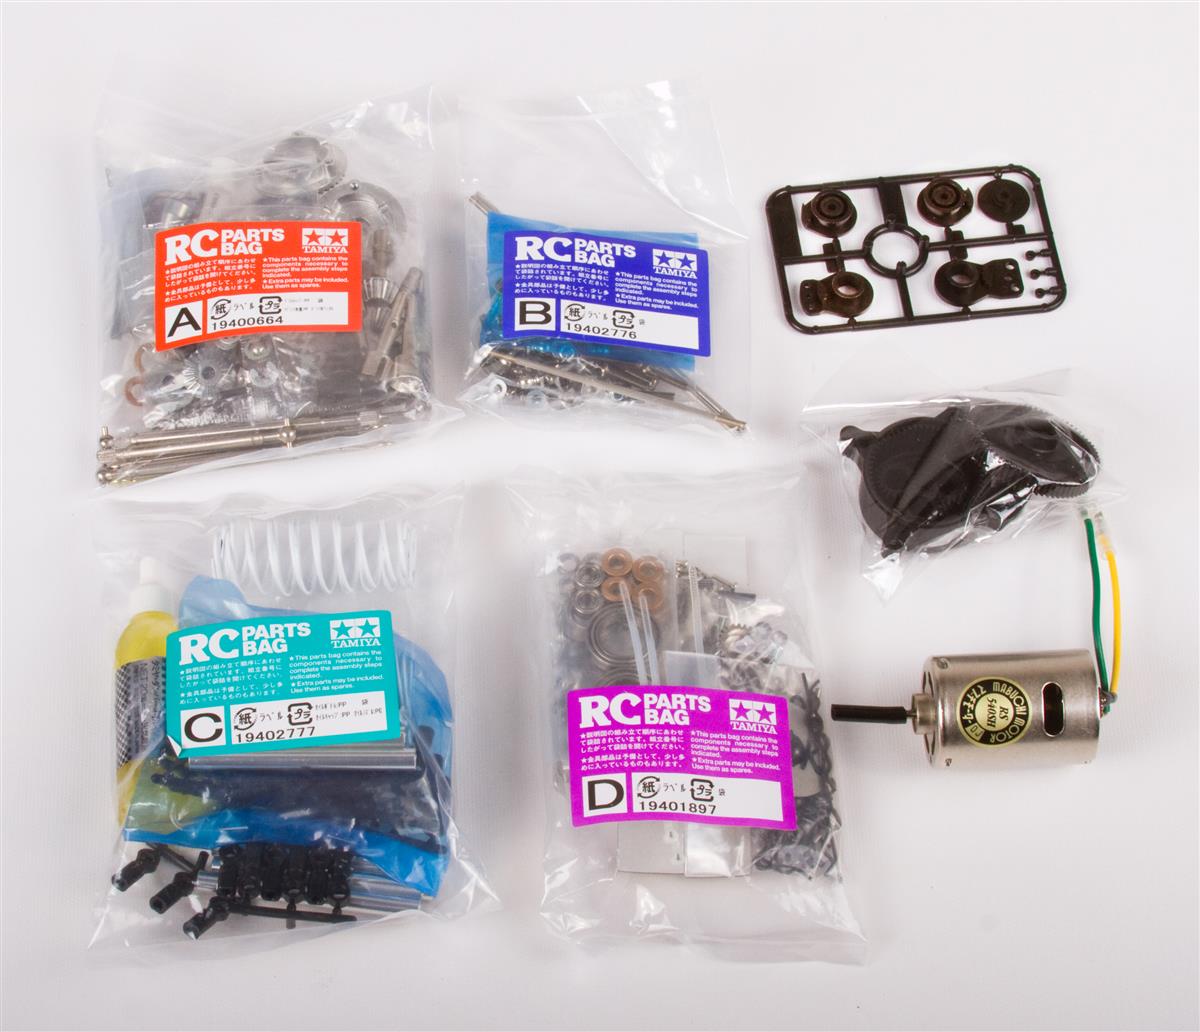 RS_Parts_bags